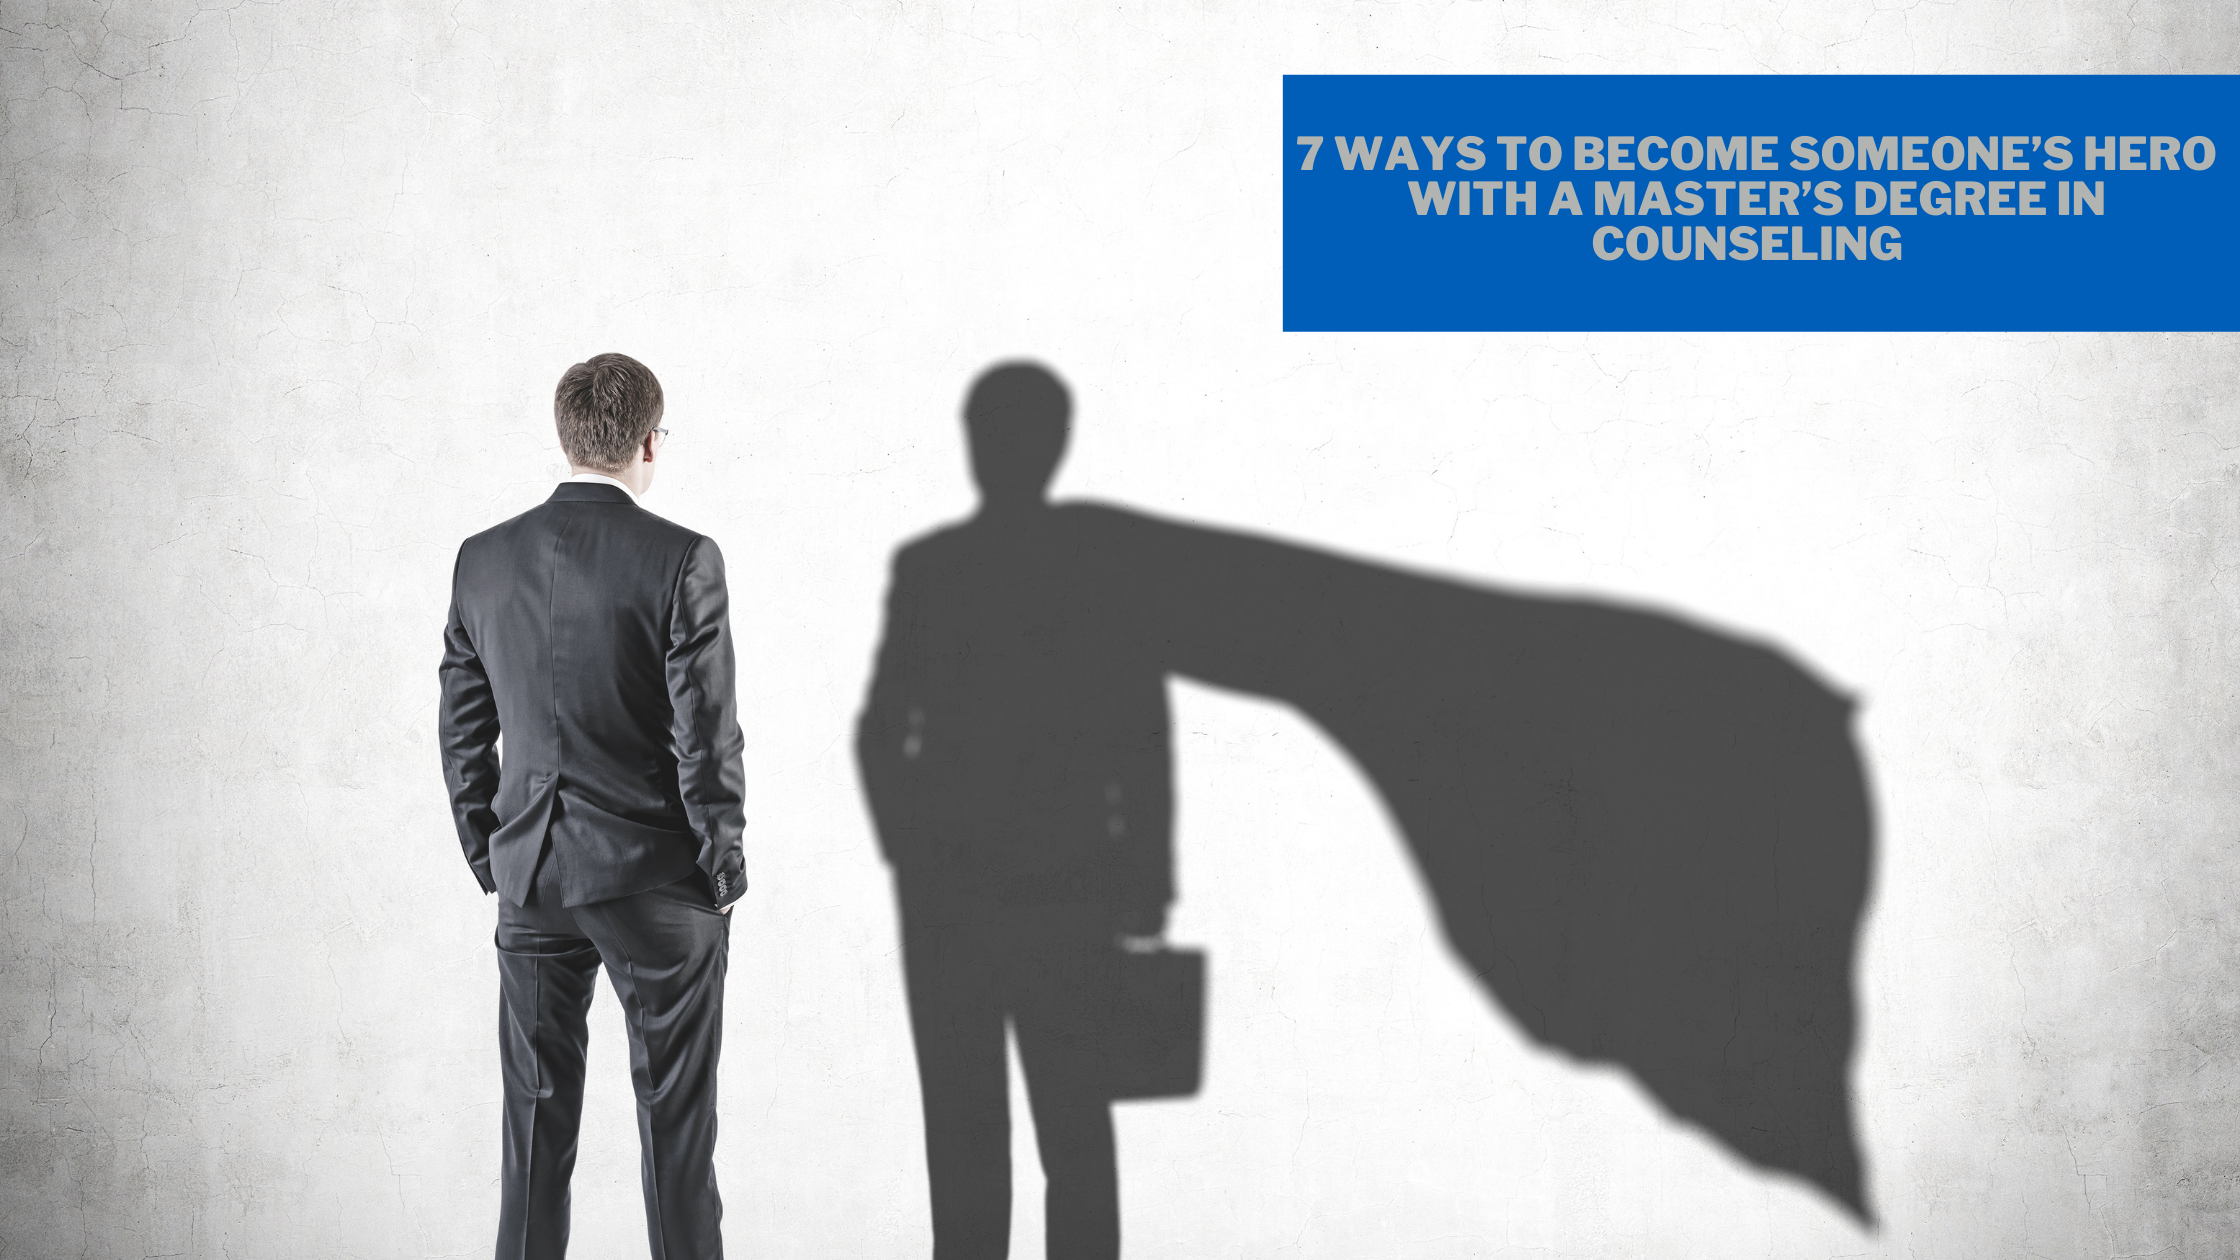 Image of 7 Ways to Become Someone’s Hero with a Master’s Degree in Counseling  